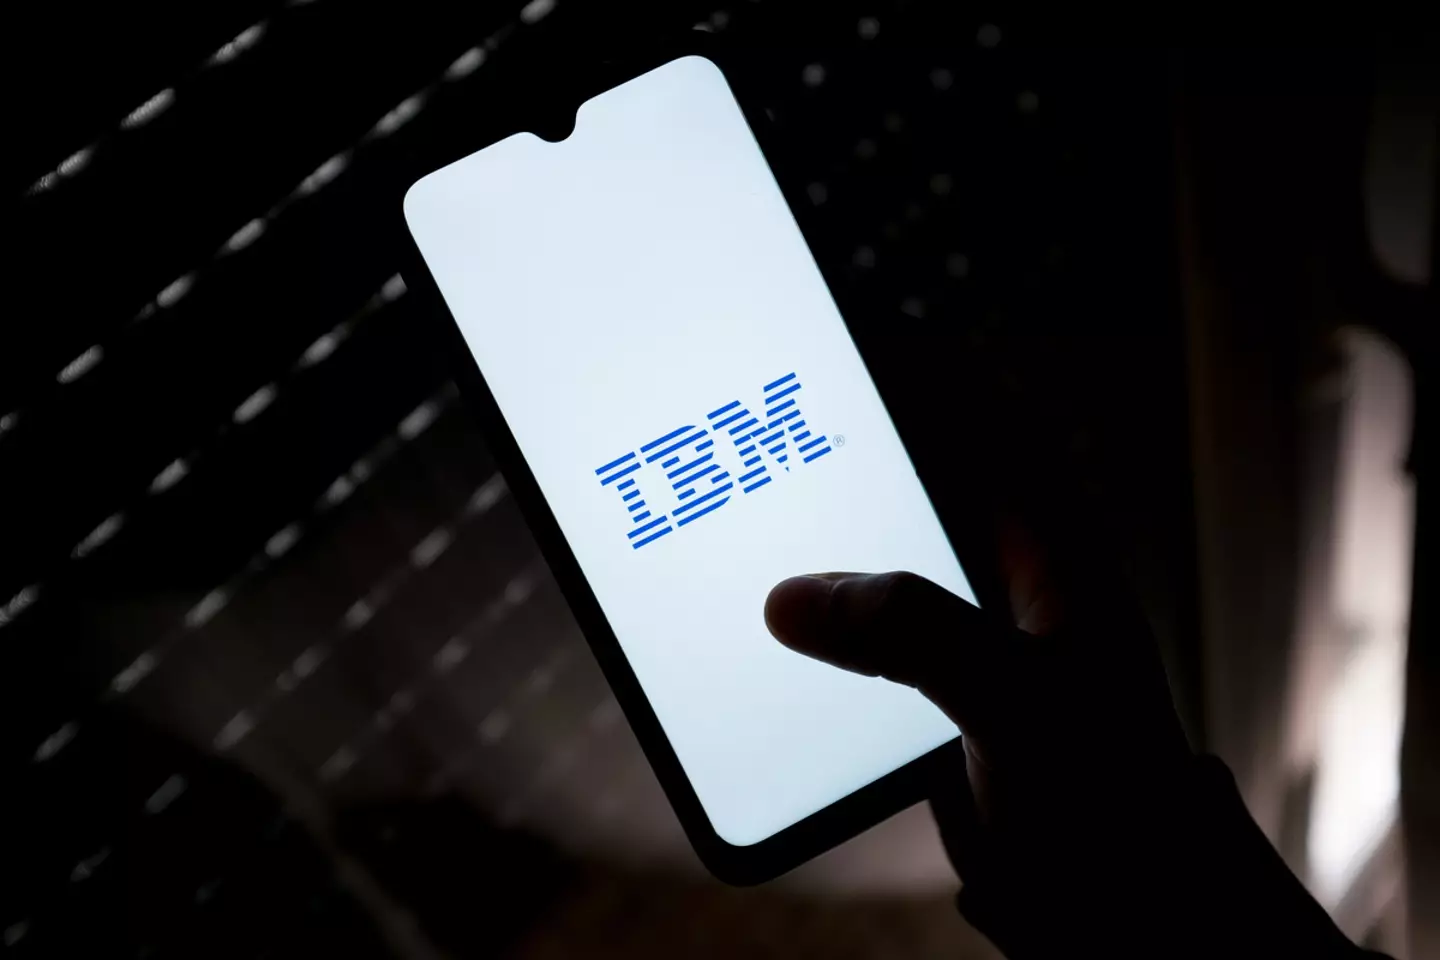 IBM pay Clifford over £50,000 a year but he sued them as he believed it was not enough. Nikolas Kokovlis/NurPhoto via Getty Images